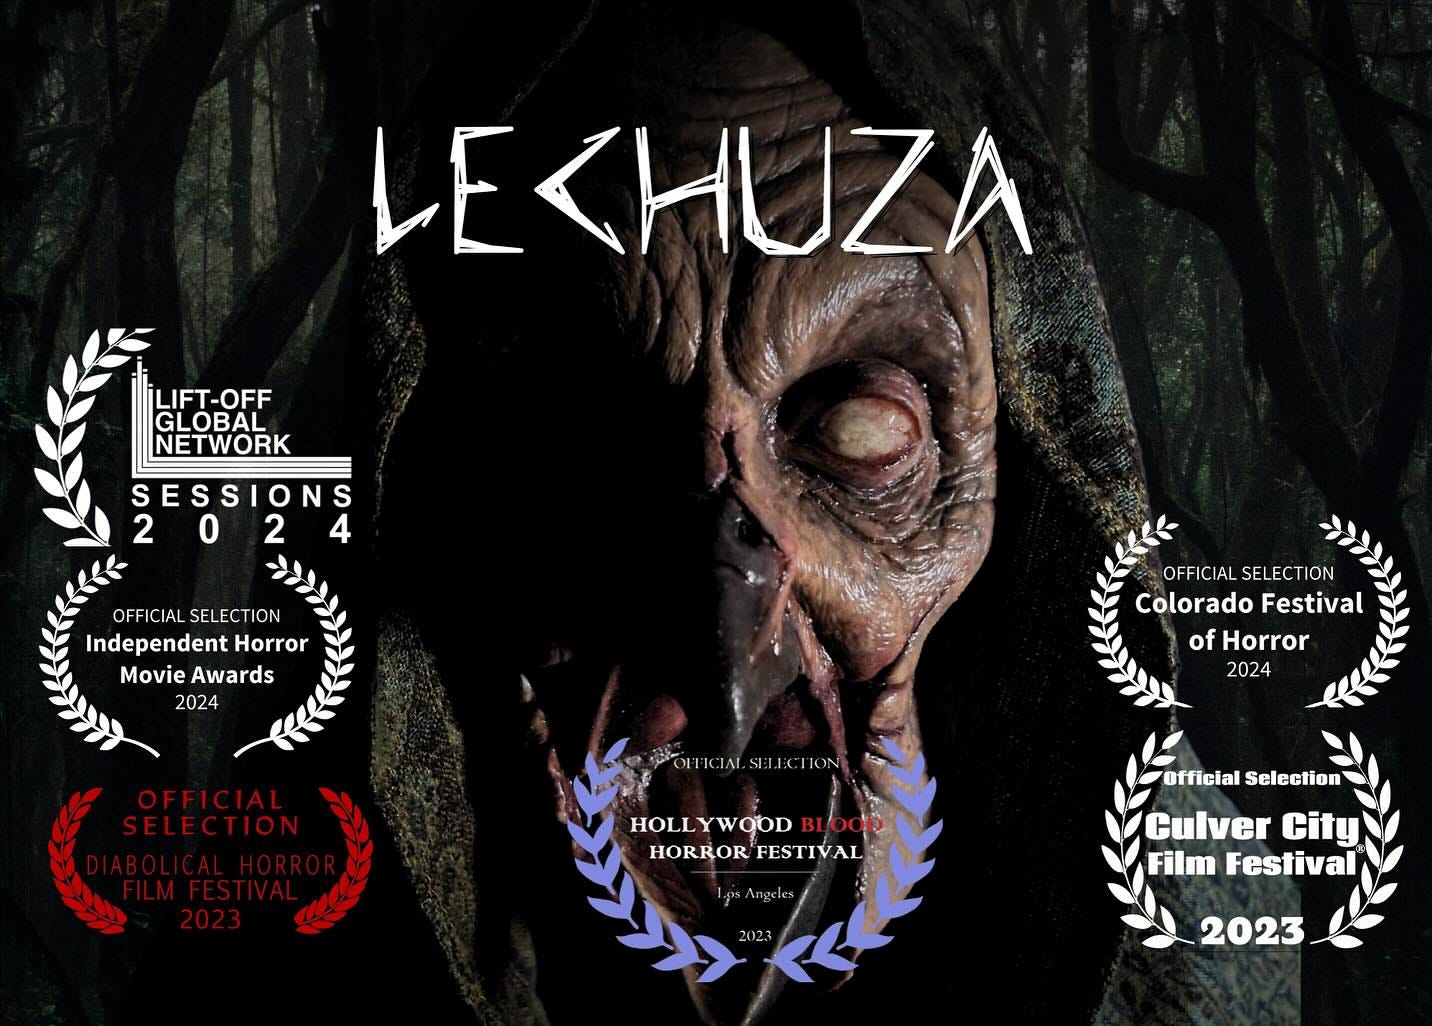 May be an image of text that says 'IFT-OFF GLOBAL NETWORK LEKHUZA SESSIONS 2 OFFICIAL SELECTION Independent Horror Movie Awards 2024 OFFICIAL SELECTION Colorado Festival ofHorror 2024 HOLLYWOOD WOOD HORROR HORFESTIVAL FESTIVAL official Selection Culver City Film Festival 2023'